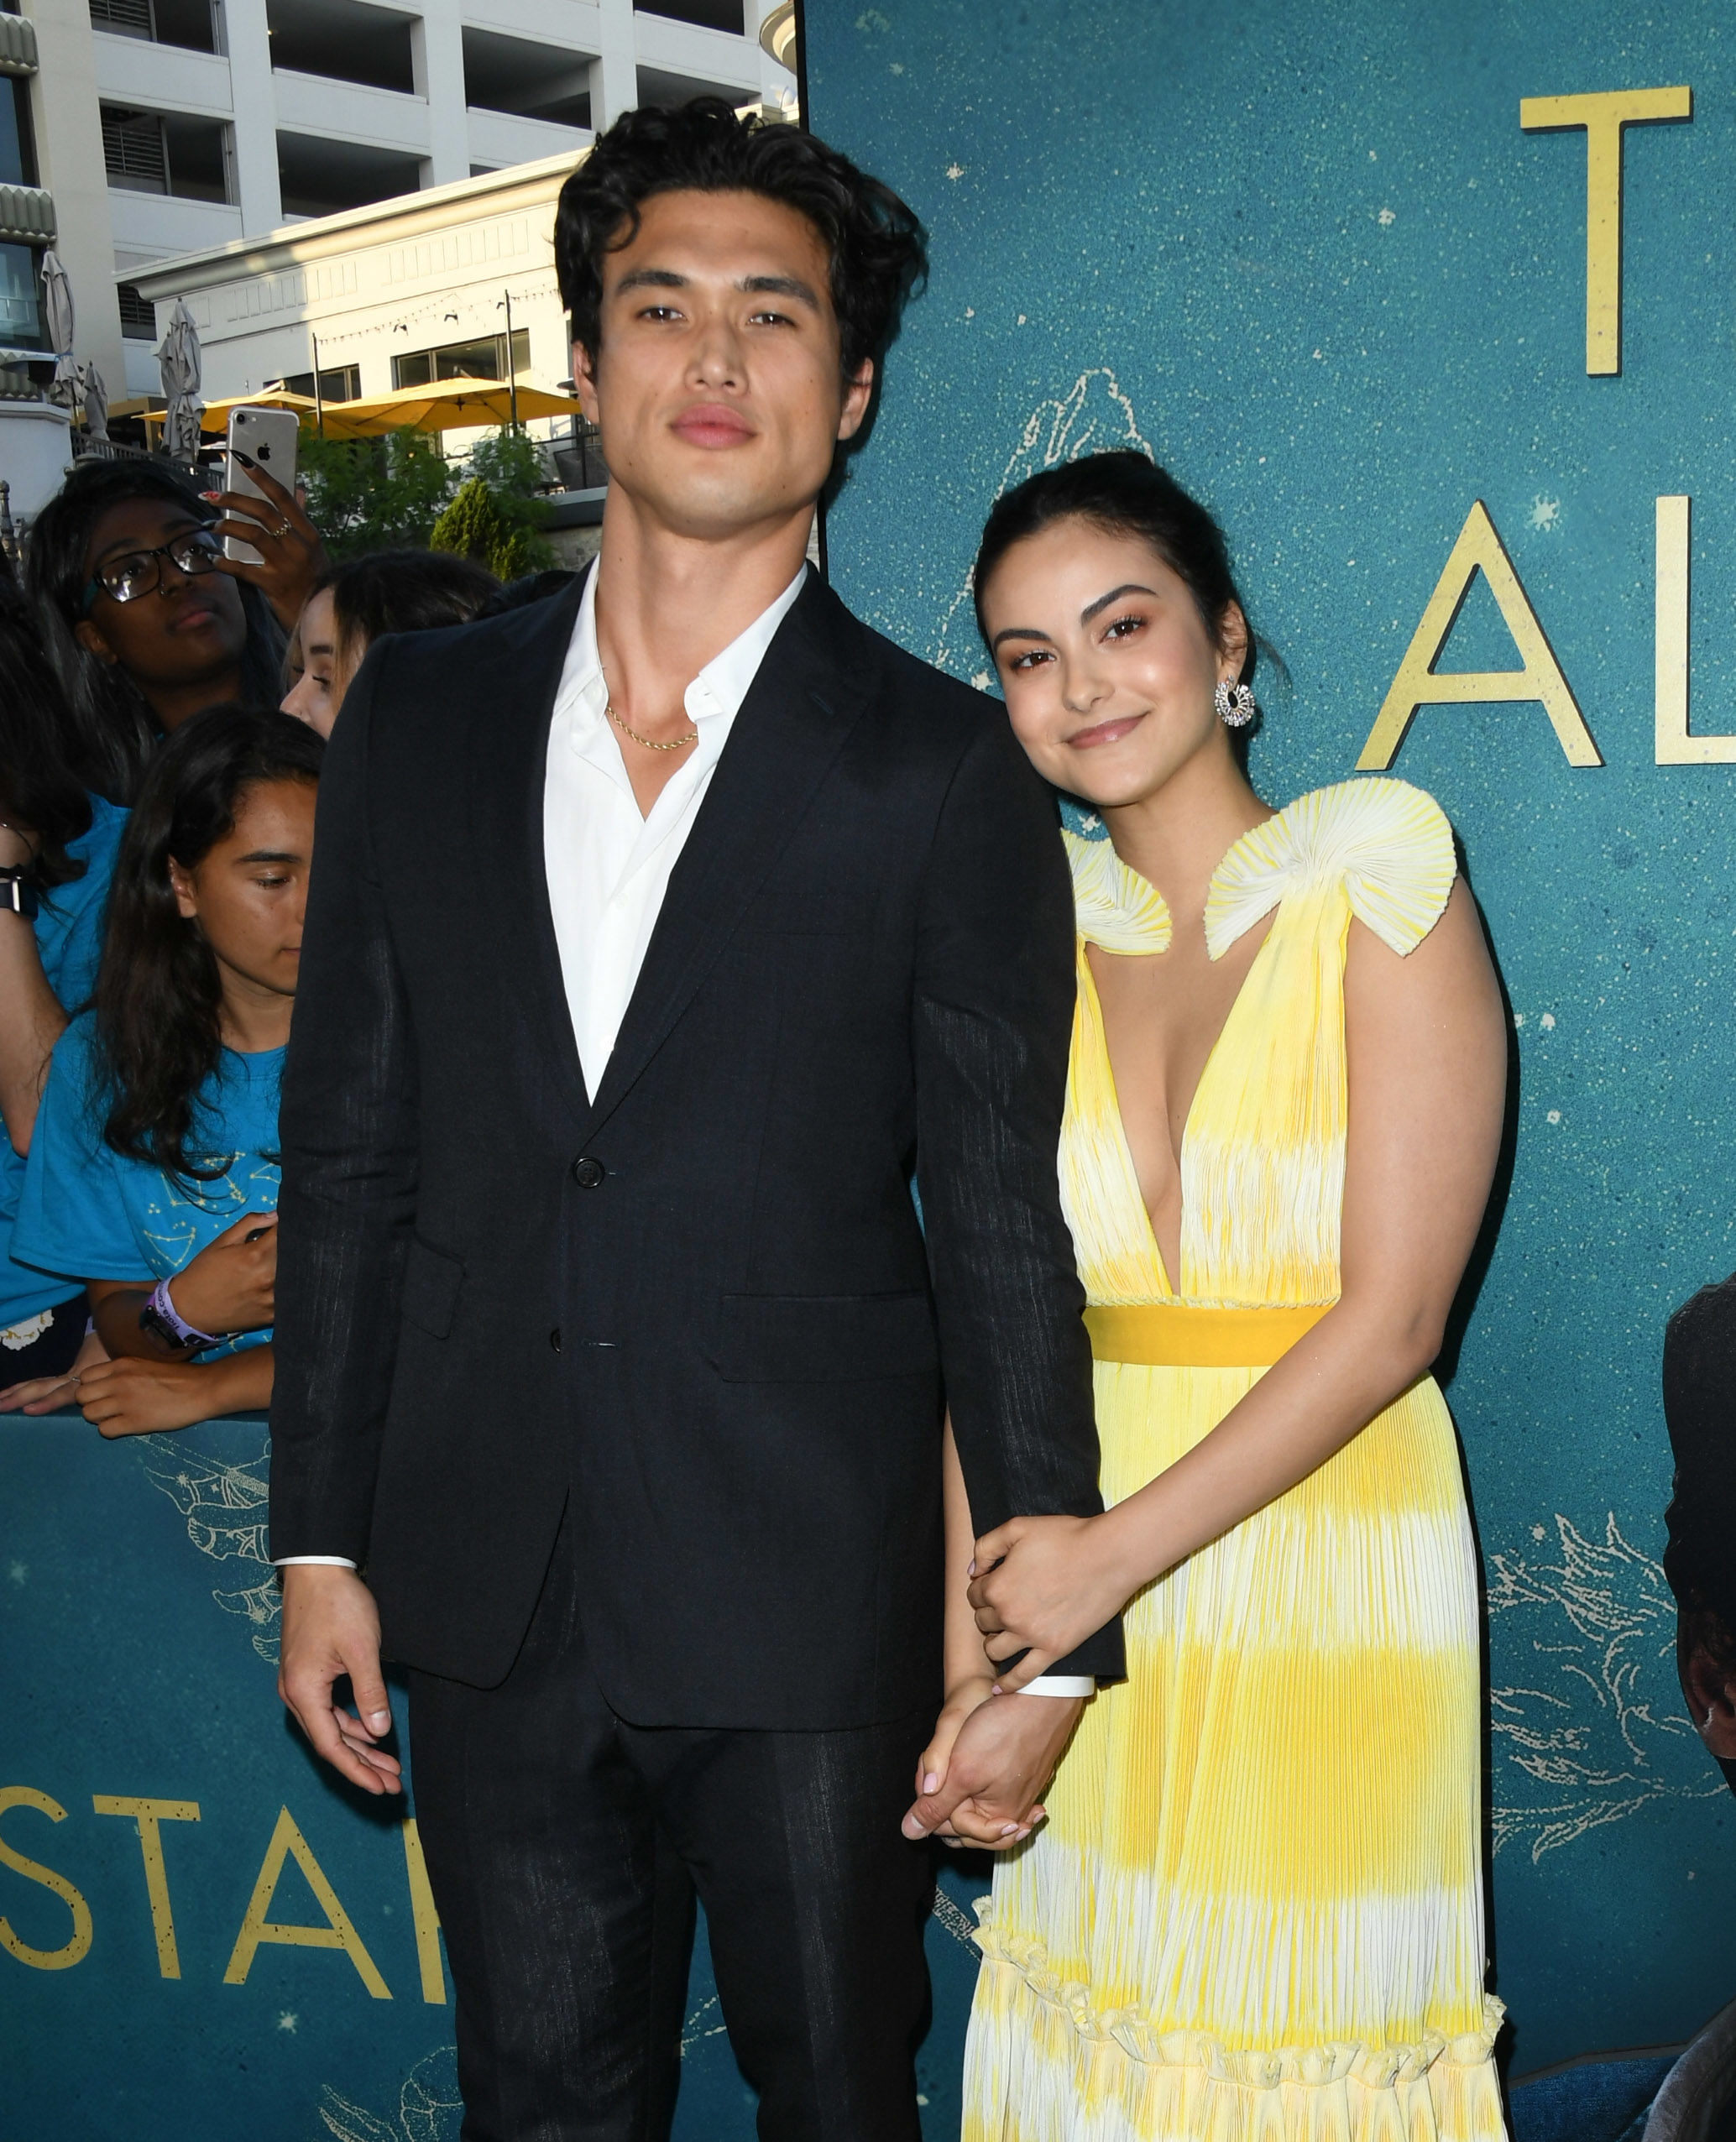 Charles in a suit and Camila in a yellow ruffled dress, holding hands